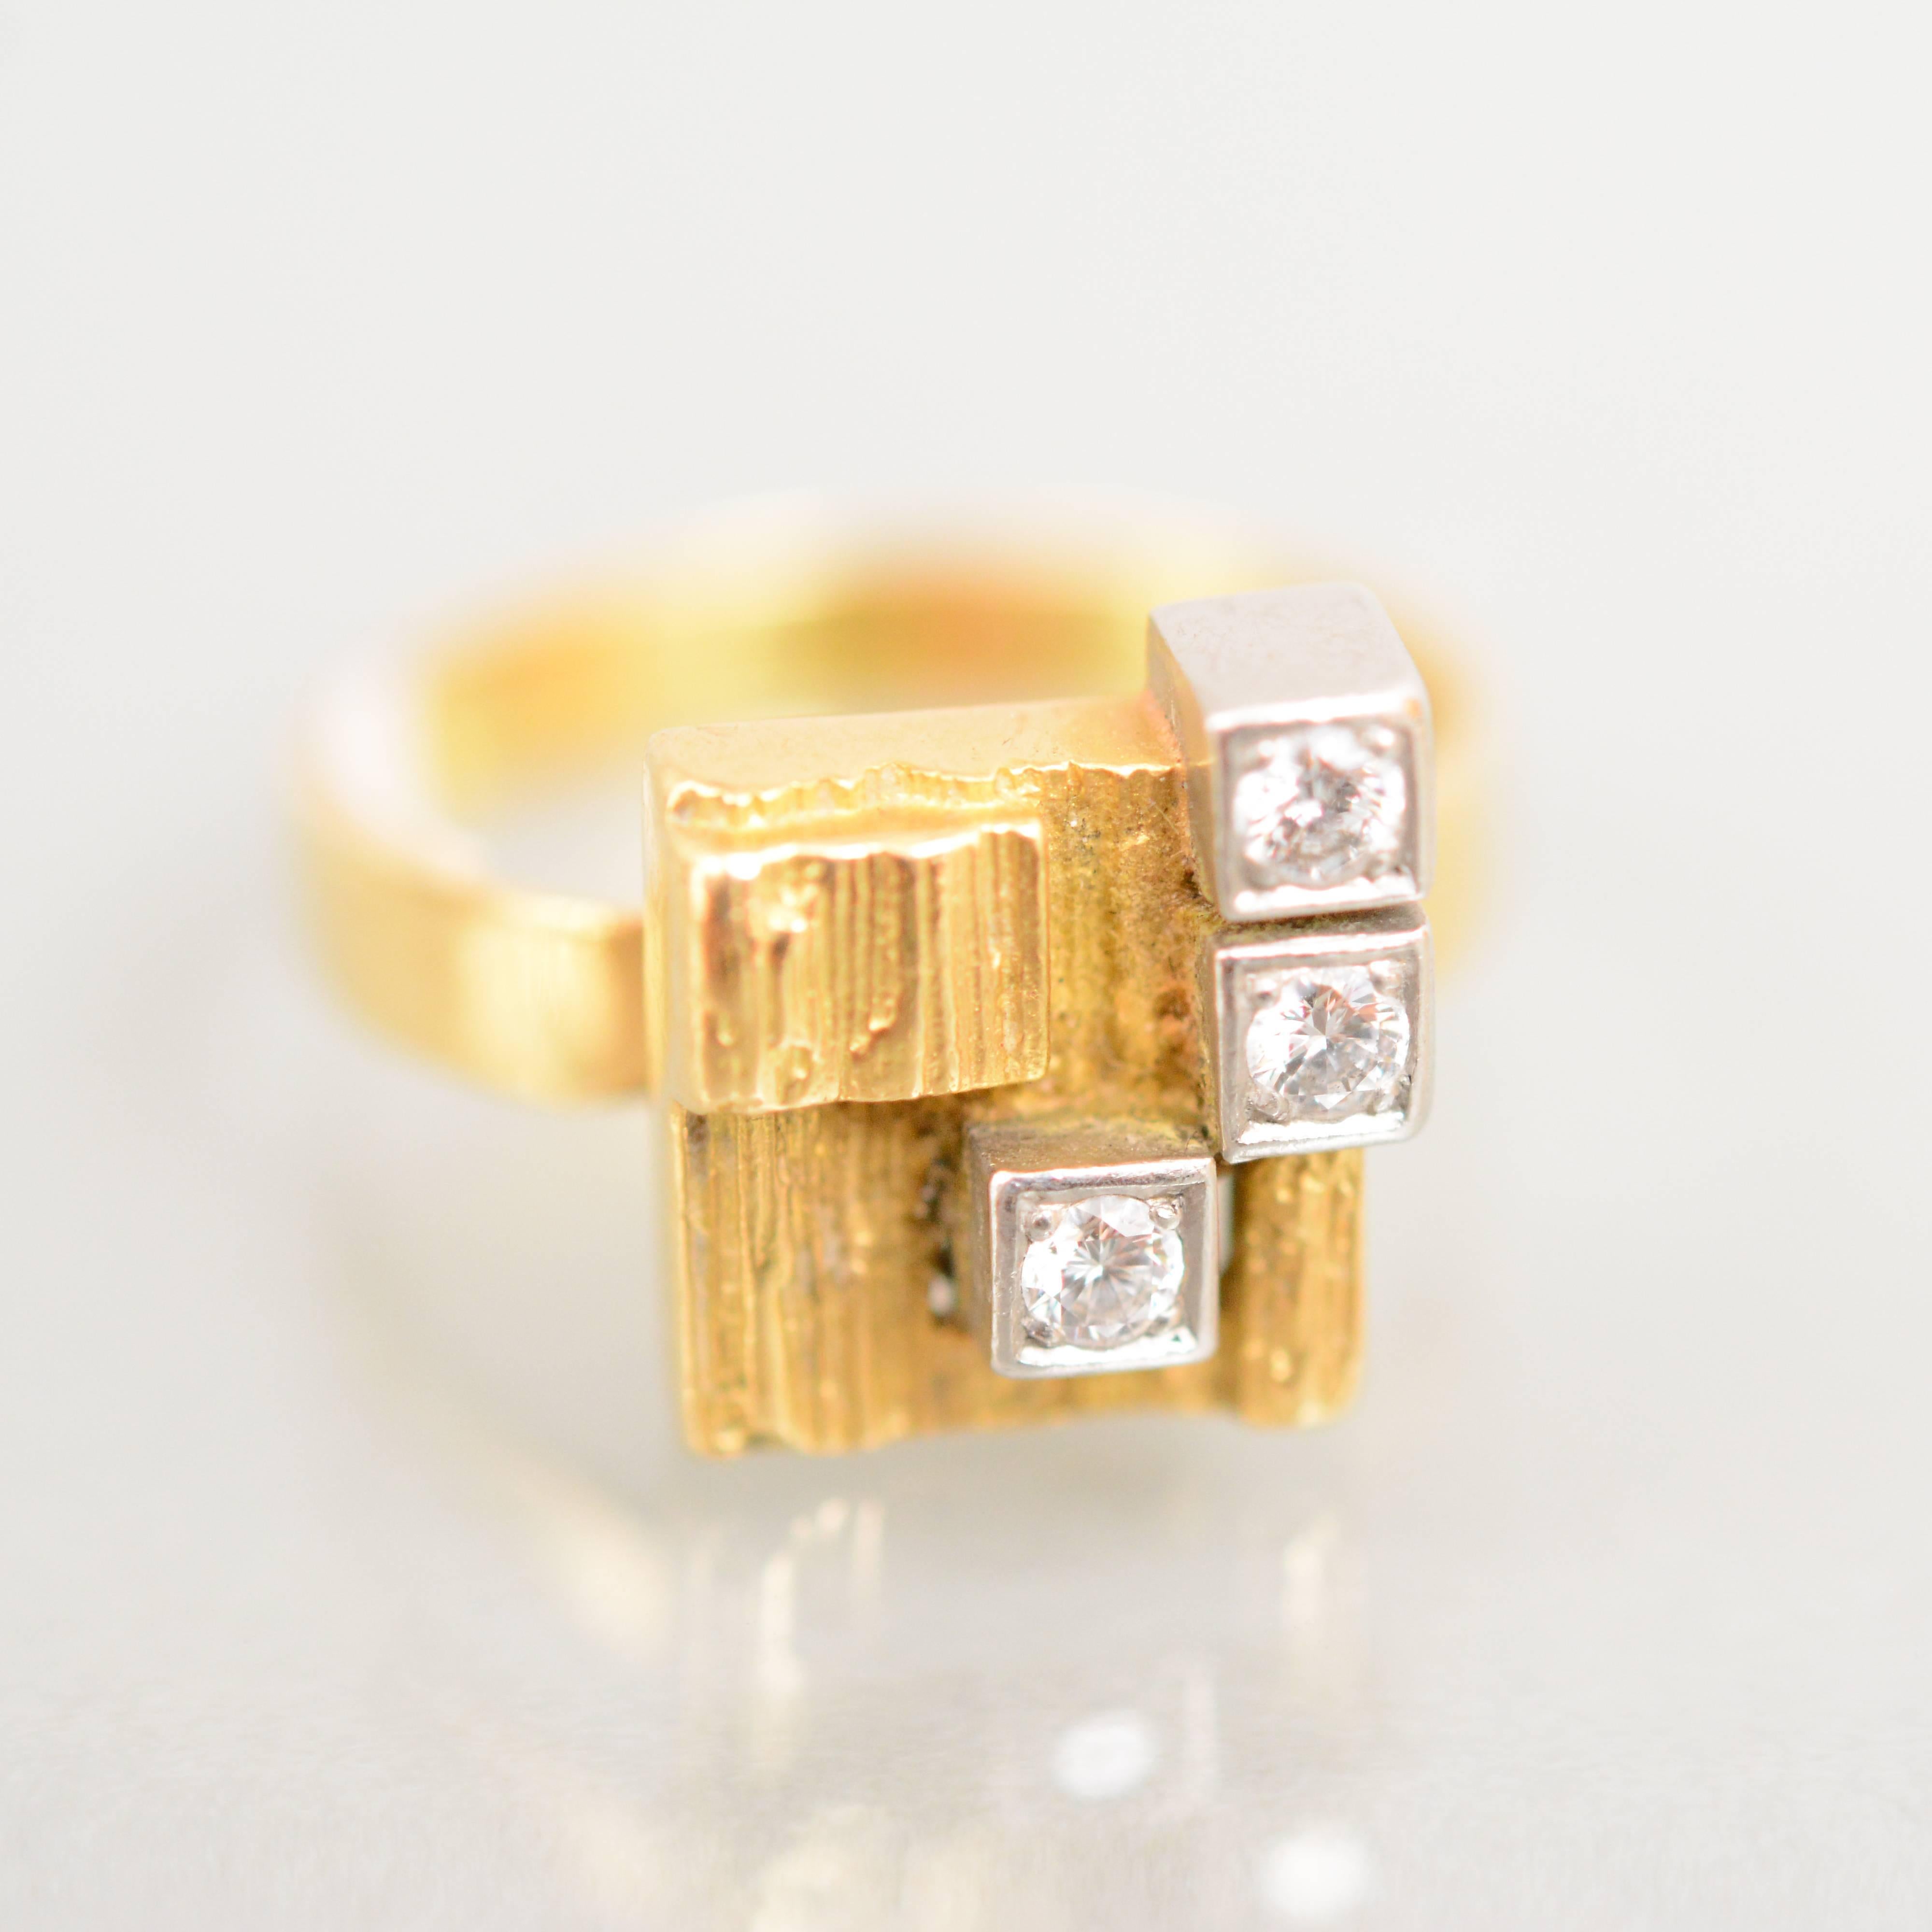 A rare gold and diamond ring, Diamond City, by Bjorn Weckstrom for Lapponia, Finland. Designed in 1969. This ring is dated K8 for 1987.

Size: 17 1/4 mm.